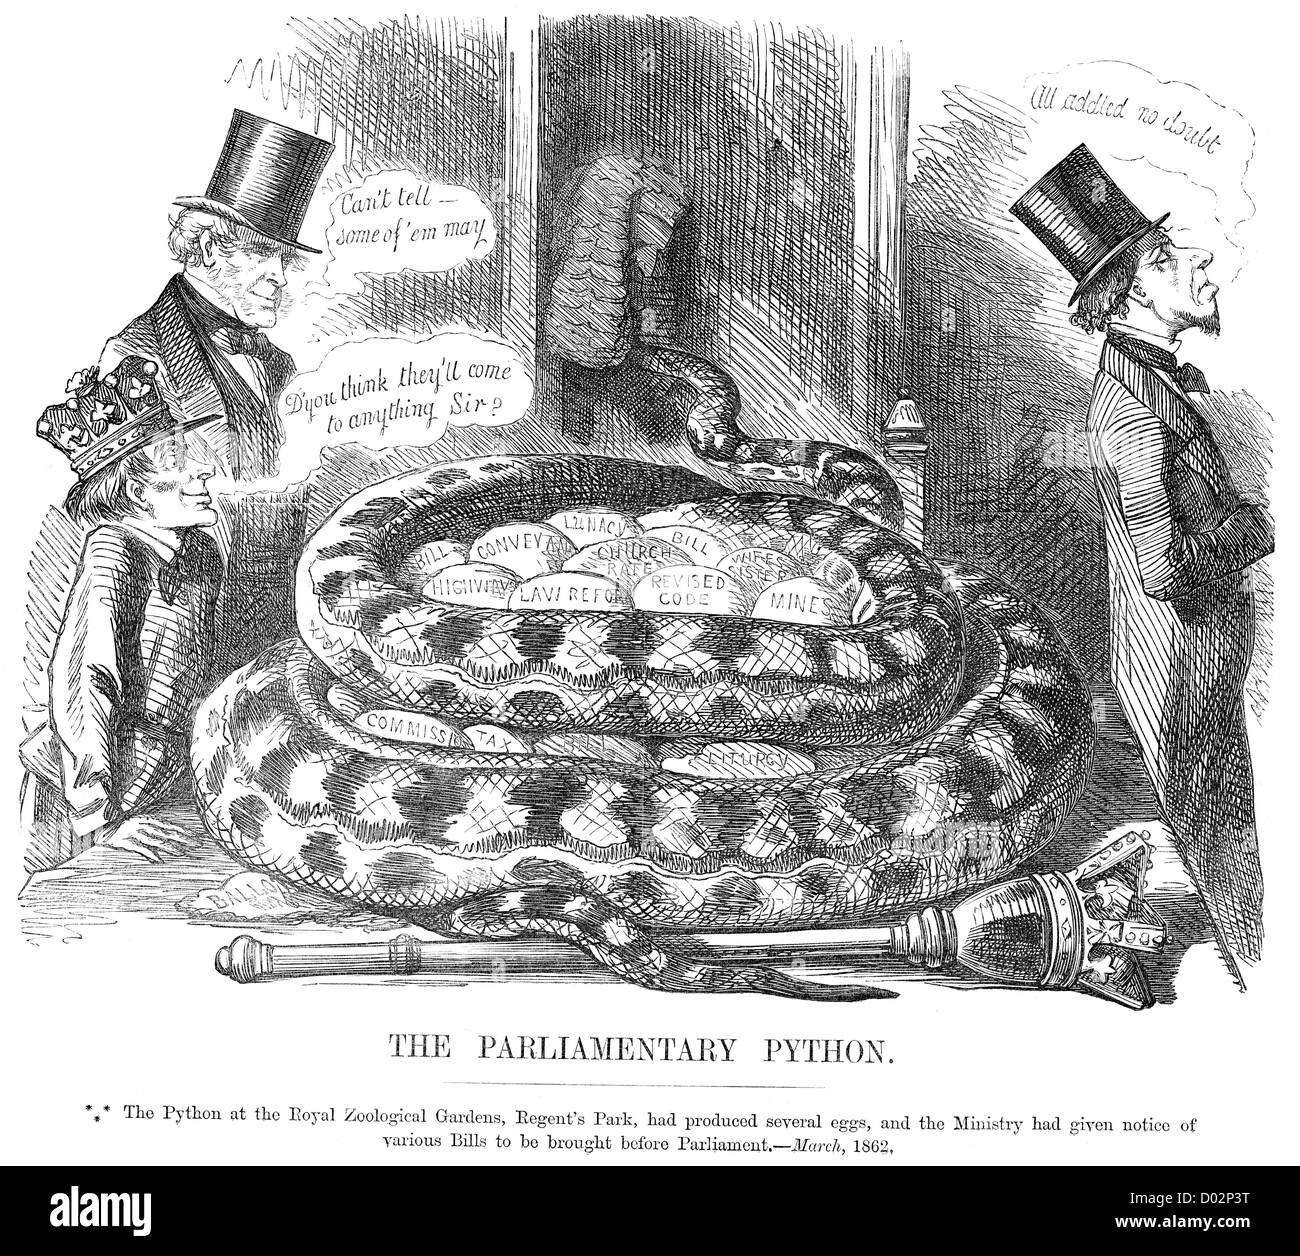 The Parliamentary Python. Political cartoon about the various Bills before  Parliament, March 1862 Stock Photo - Alamy